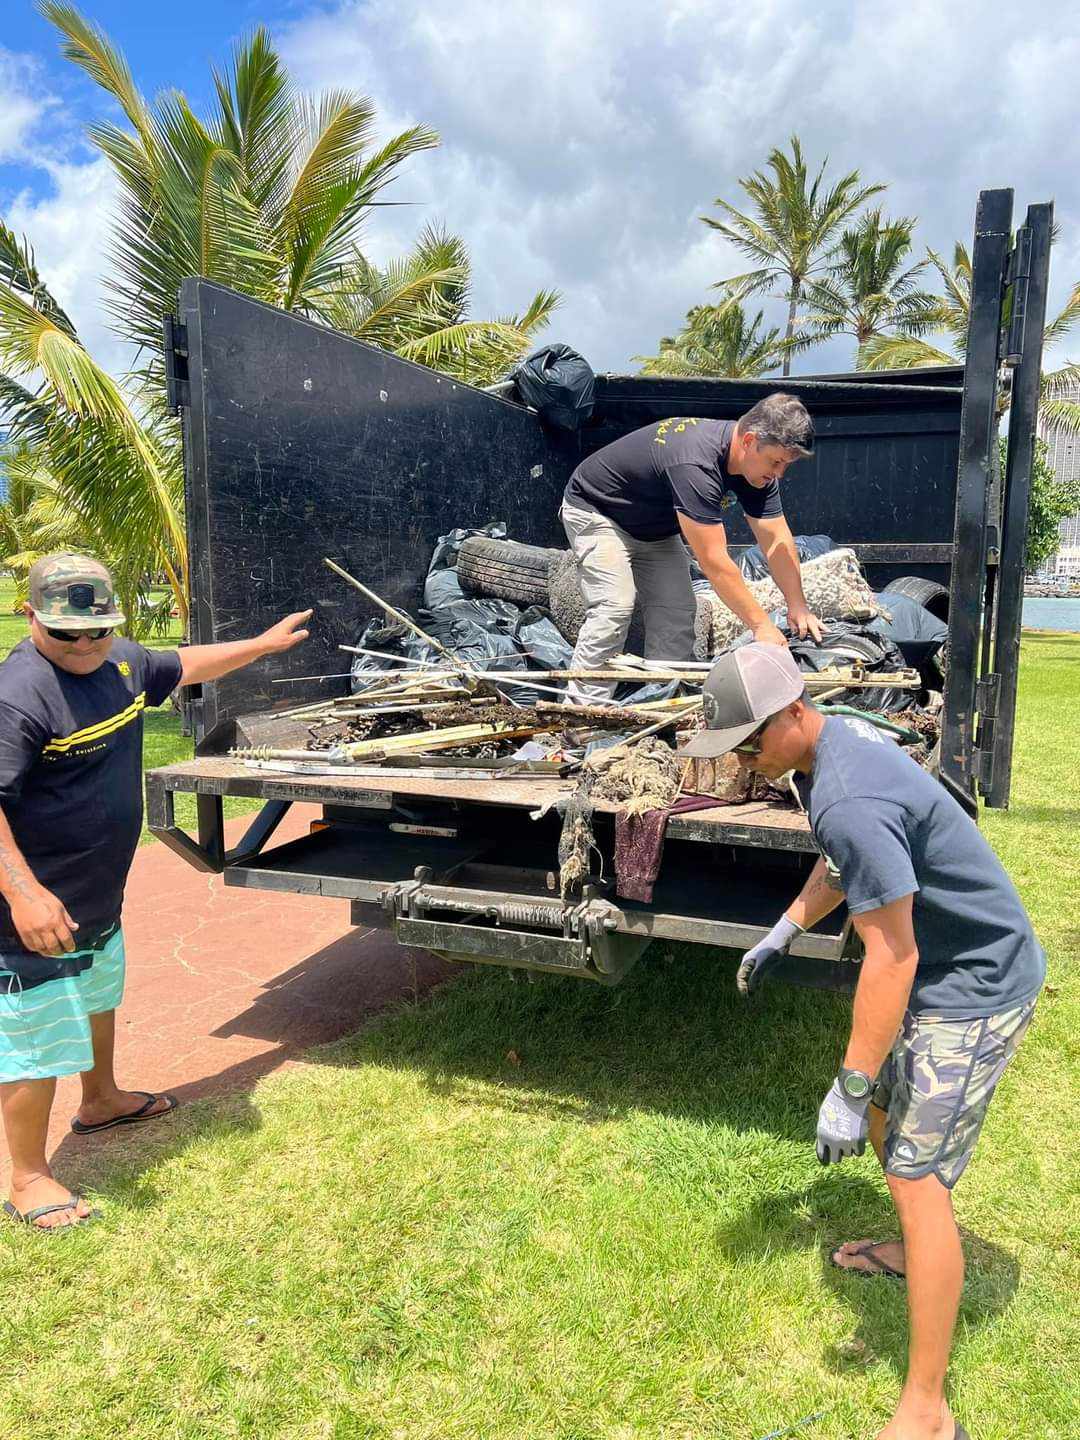 Volunteers tossing trash into Aloha Junk Man's truck on Magic Island during the Earth Day Hawaii cleanup